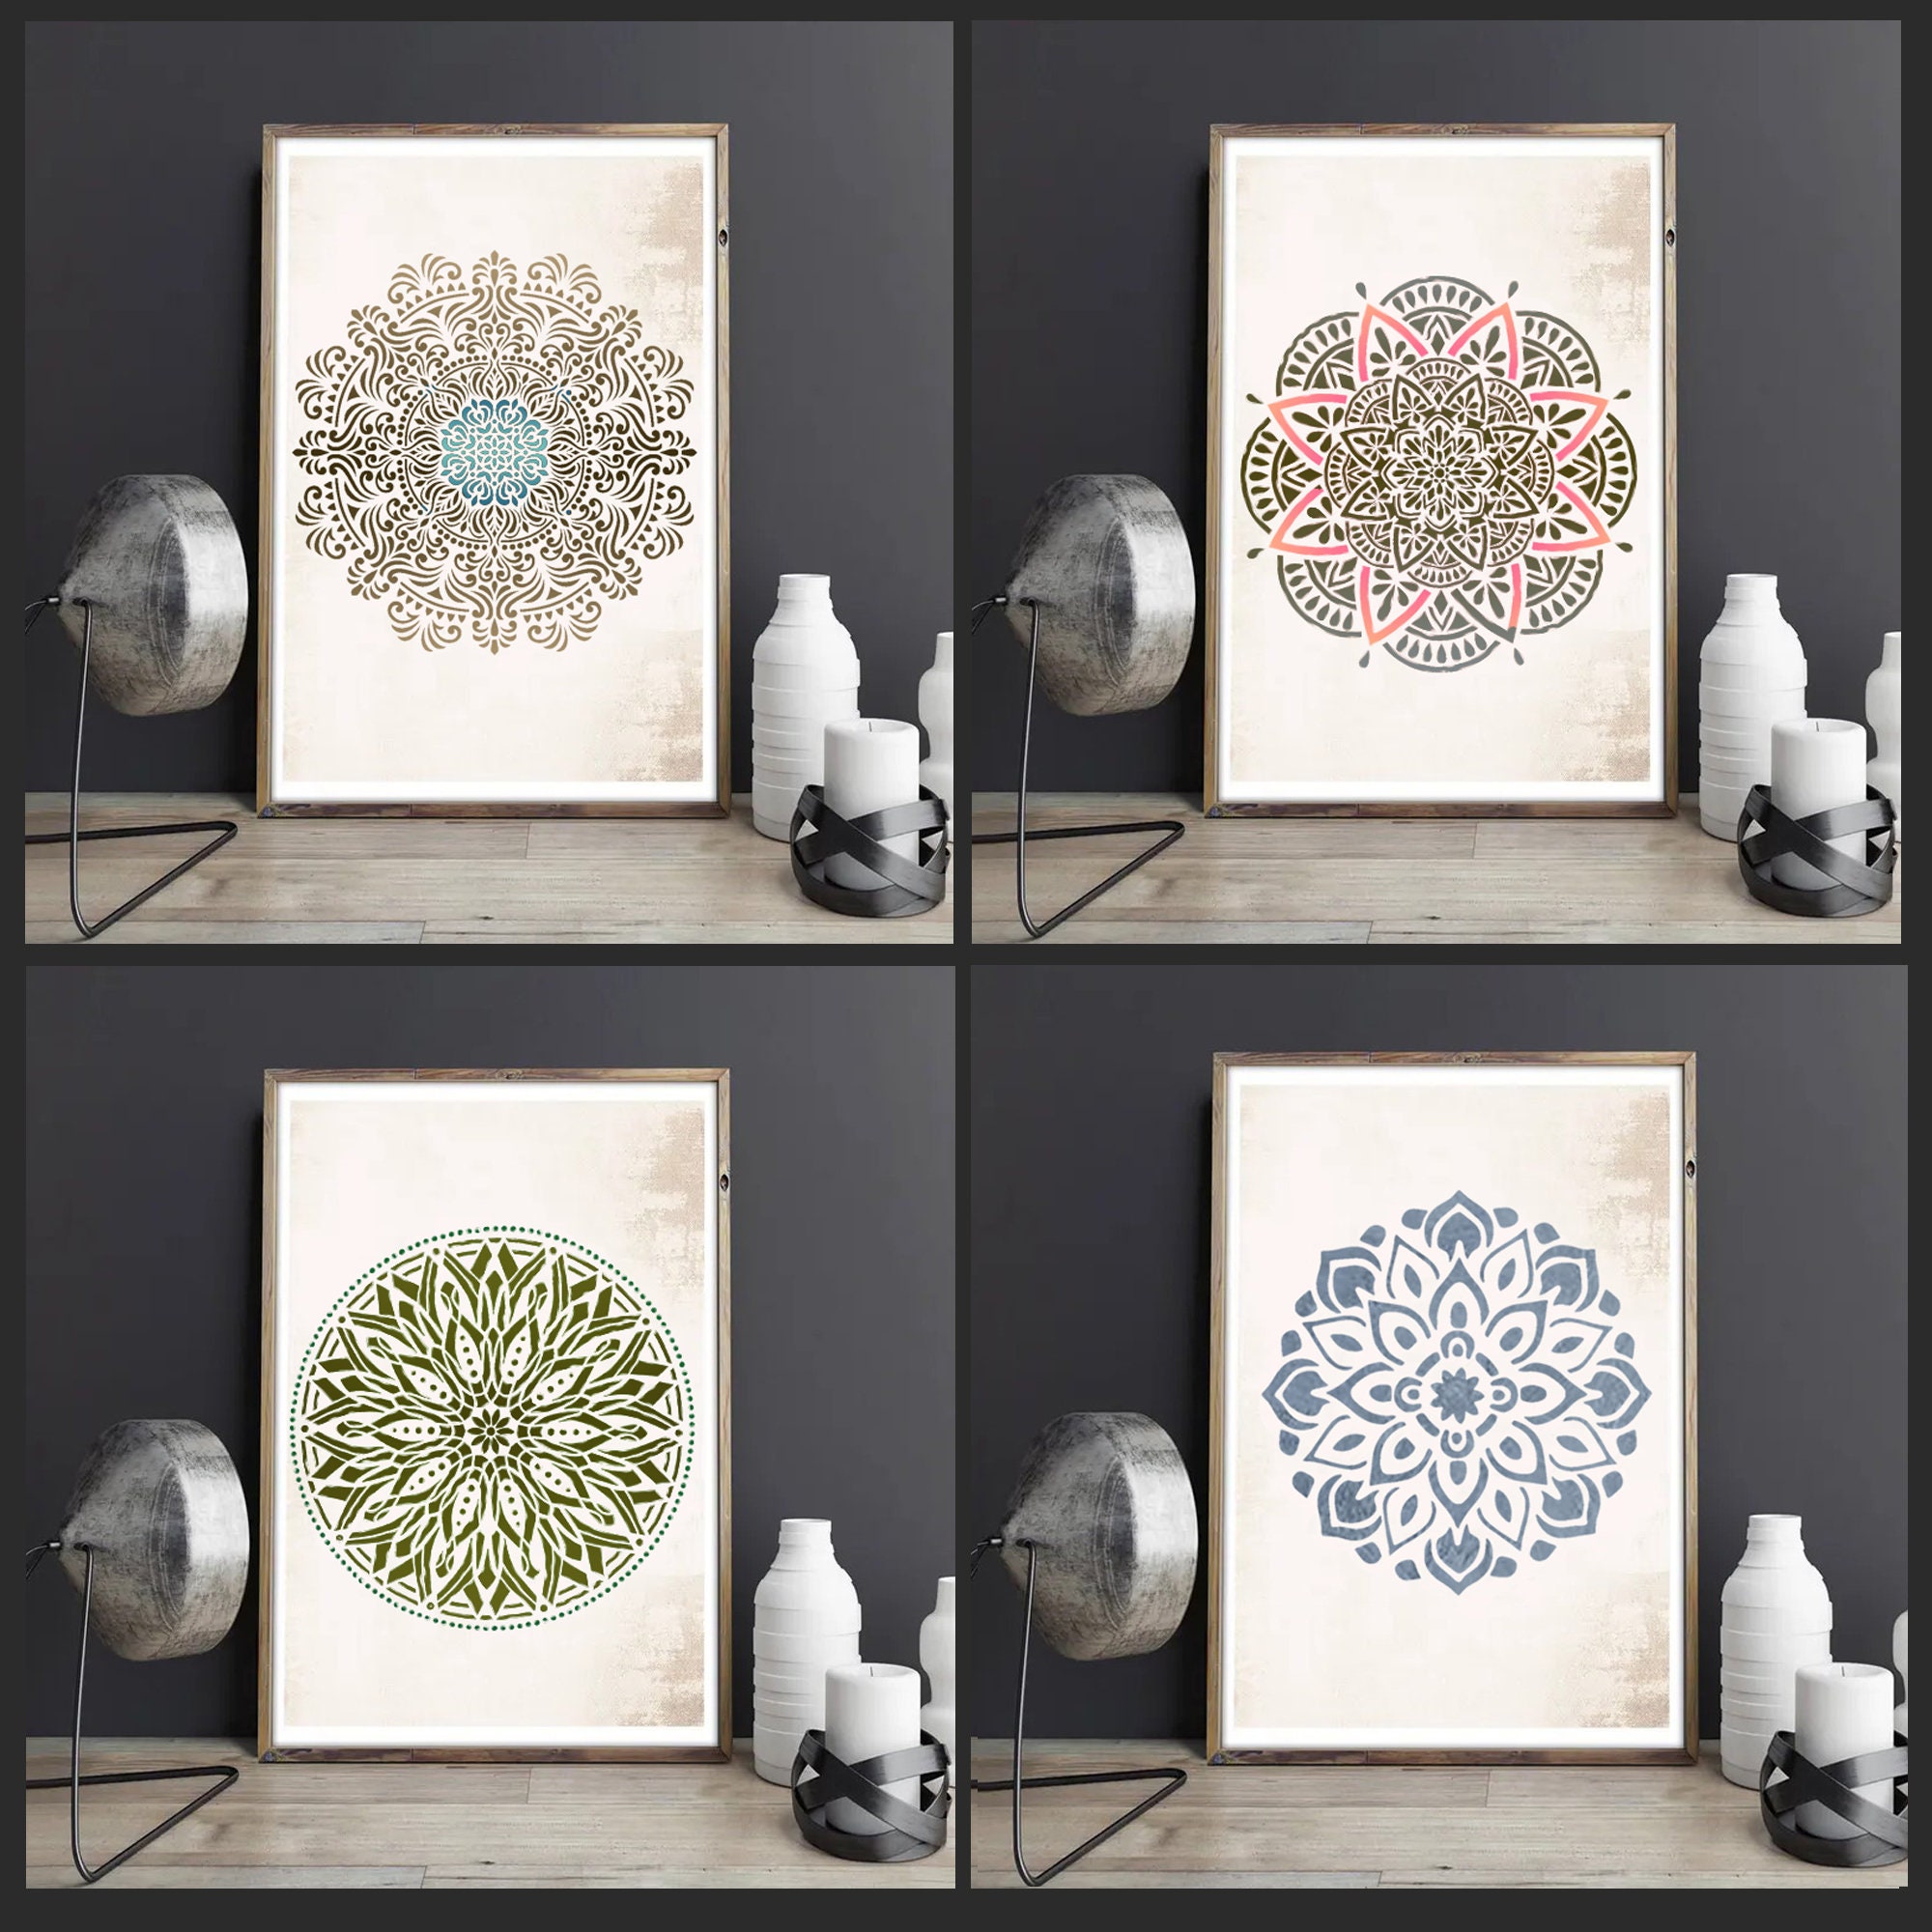 32 Pieces Geometric Stencils 6 x 6 Inch Painting Templates Mandala Stencil  for Scrapbooking Cookie Tile Furniture Wall Floor Decor Craft Drawing